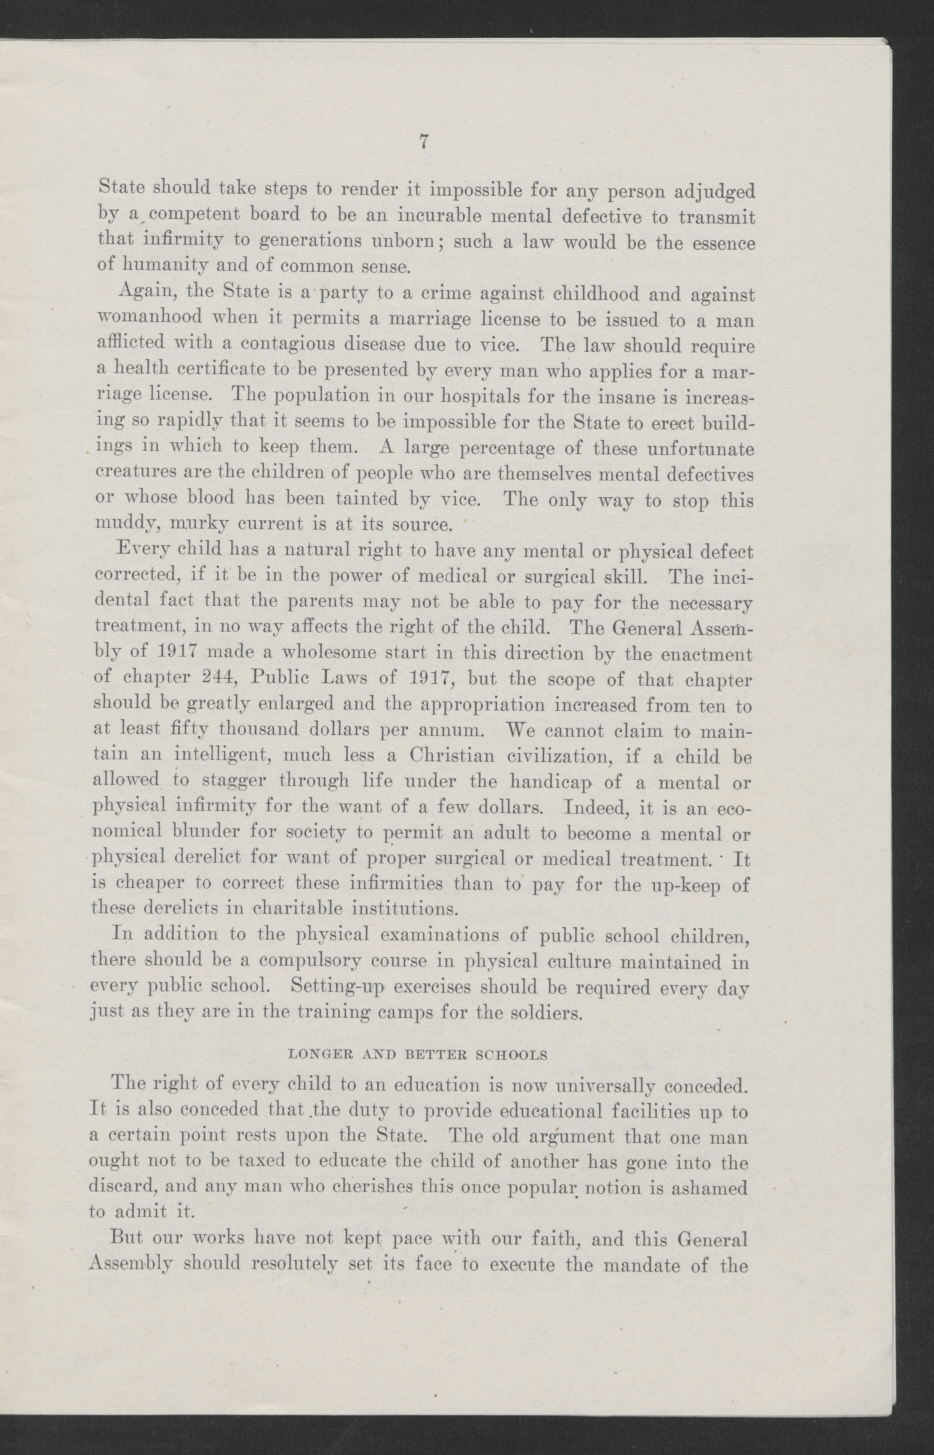 Biennial Message of Governor Thomas W. Bickett to the General Assembly, January 9, 1919, page 5